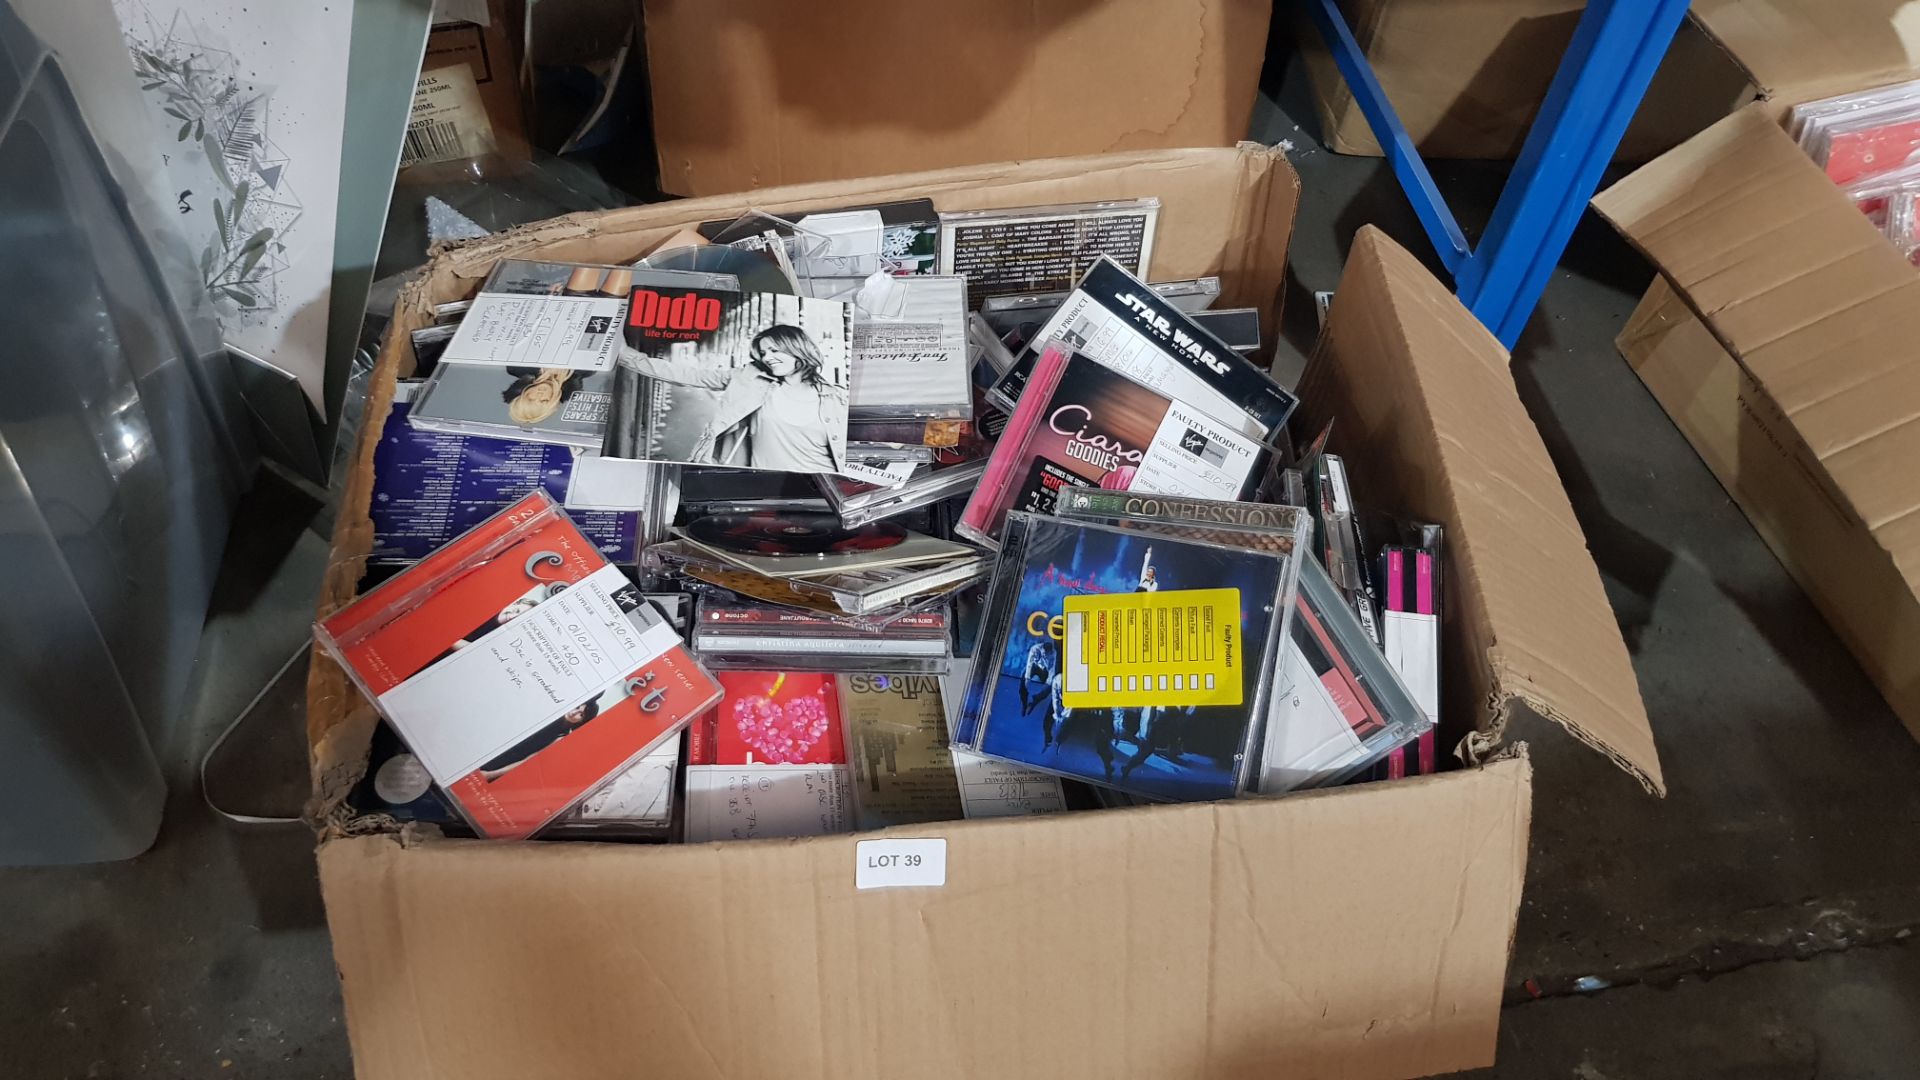 (R4H) Music. Contents Of Box : A Quantity Of Mixed Music CD’s With RTM Stickers